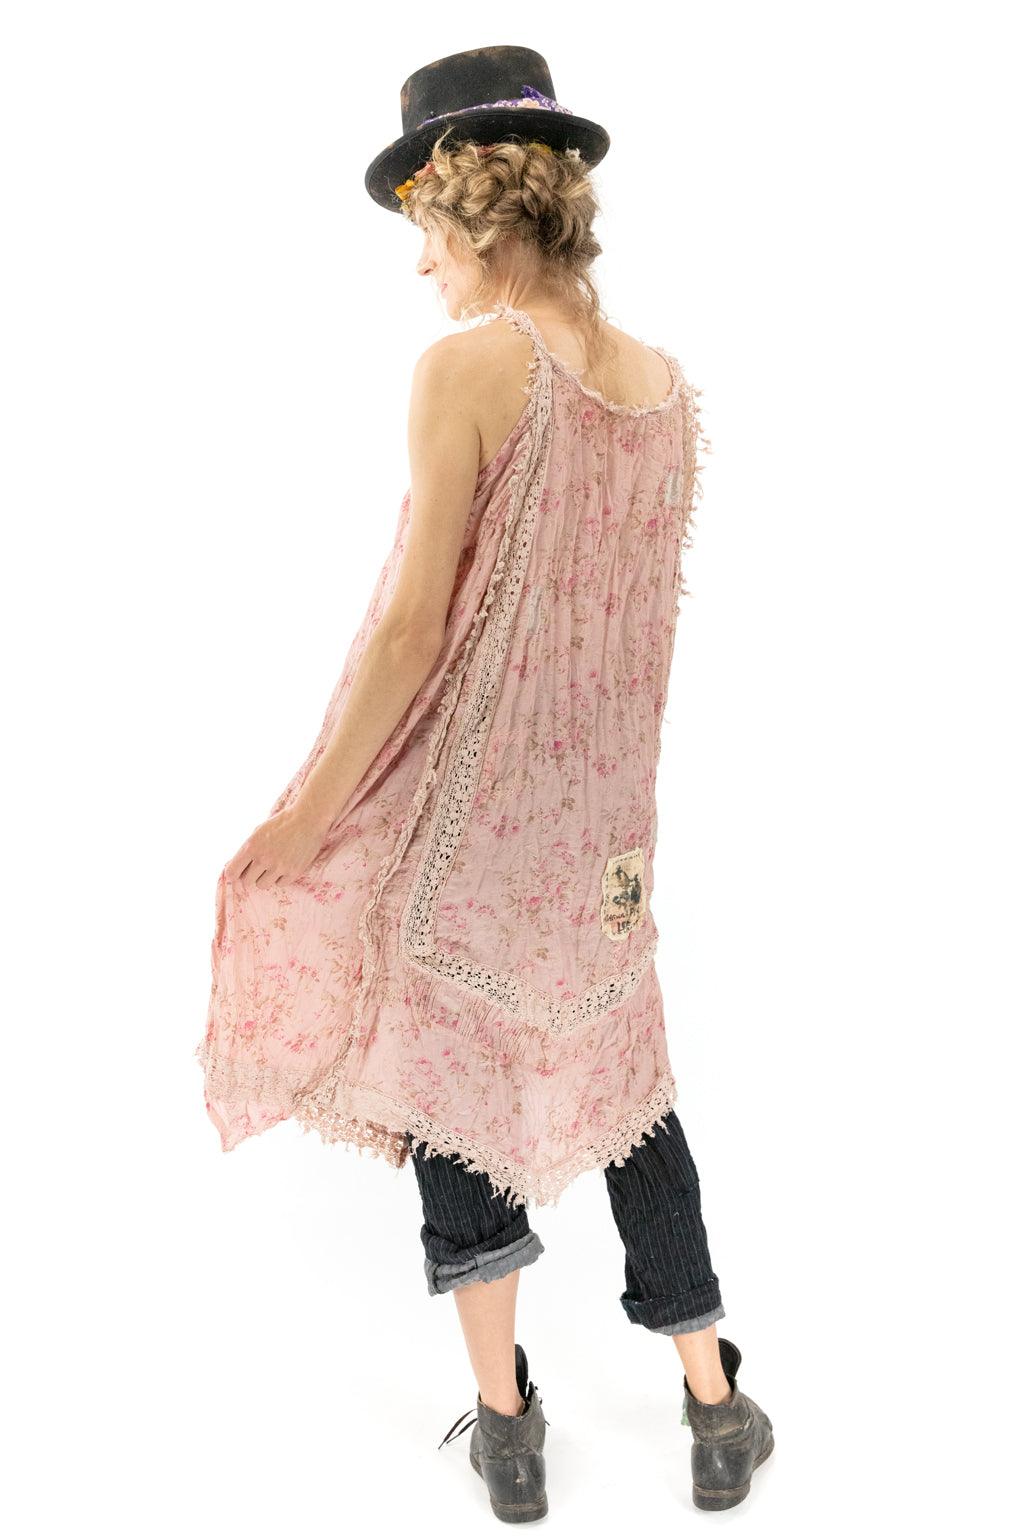 Floral Anna Cecilie Slip - Magnolia Pearl Clothing